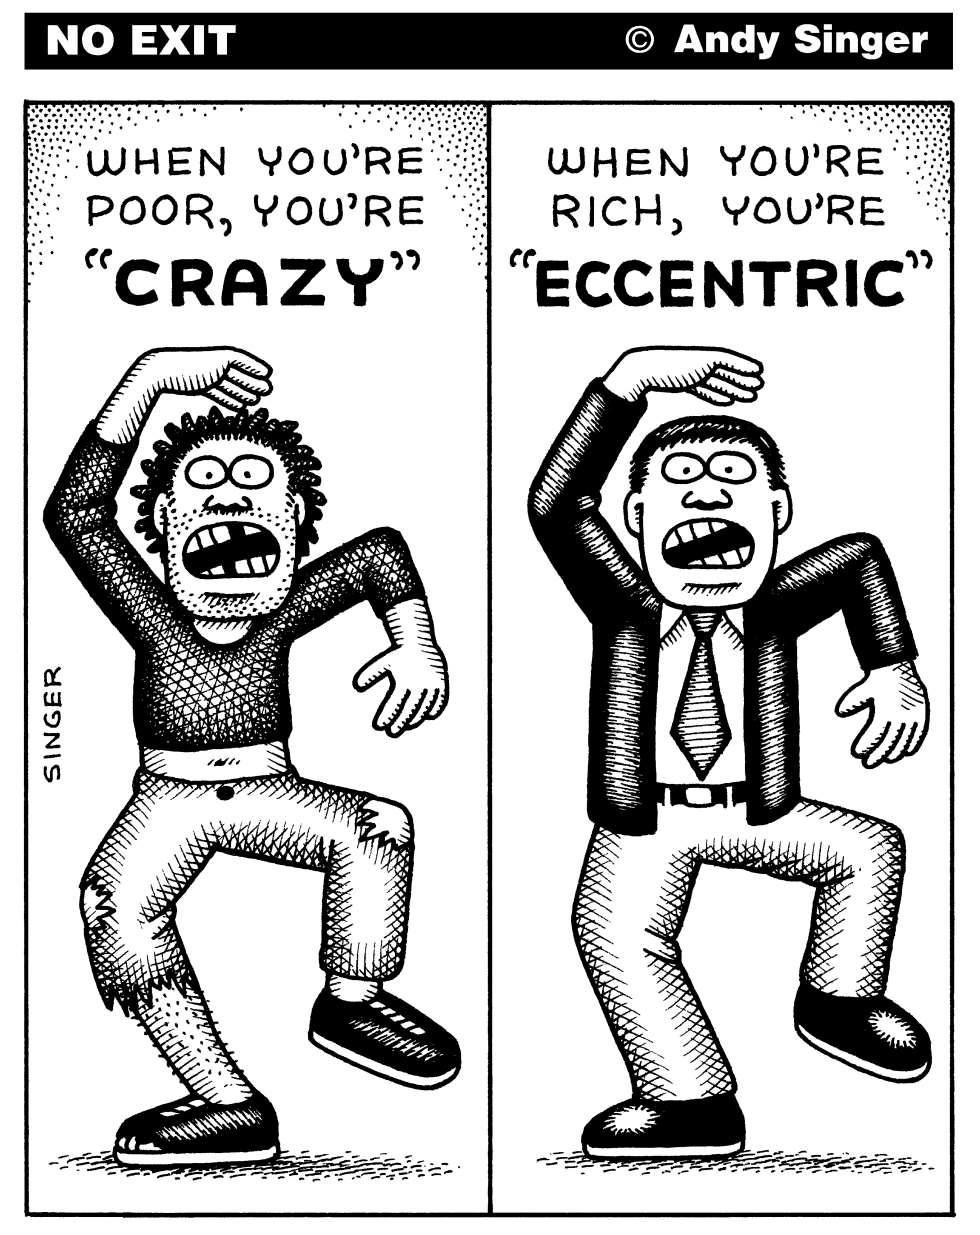 CRAZY VERSUS ECCENTRIC by Andy Singer